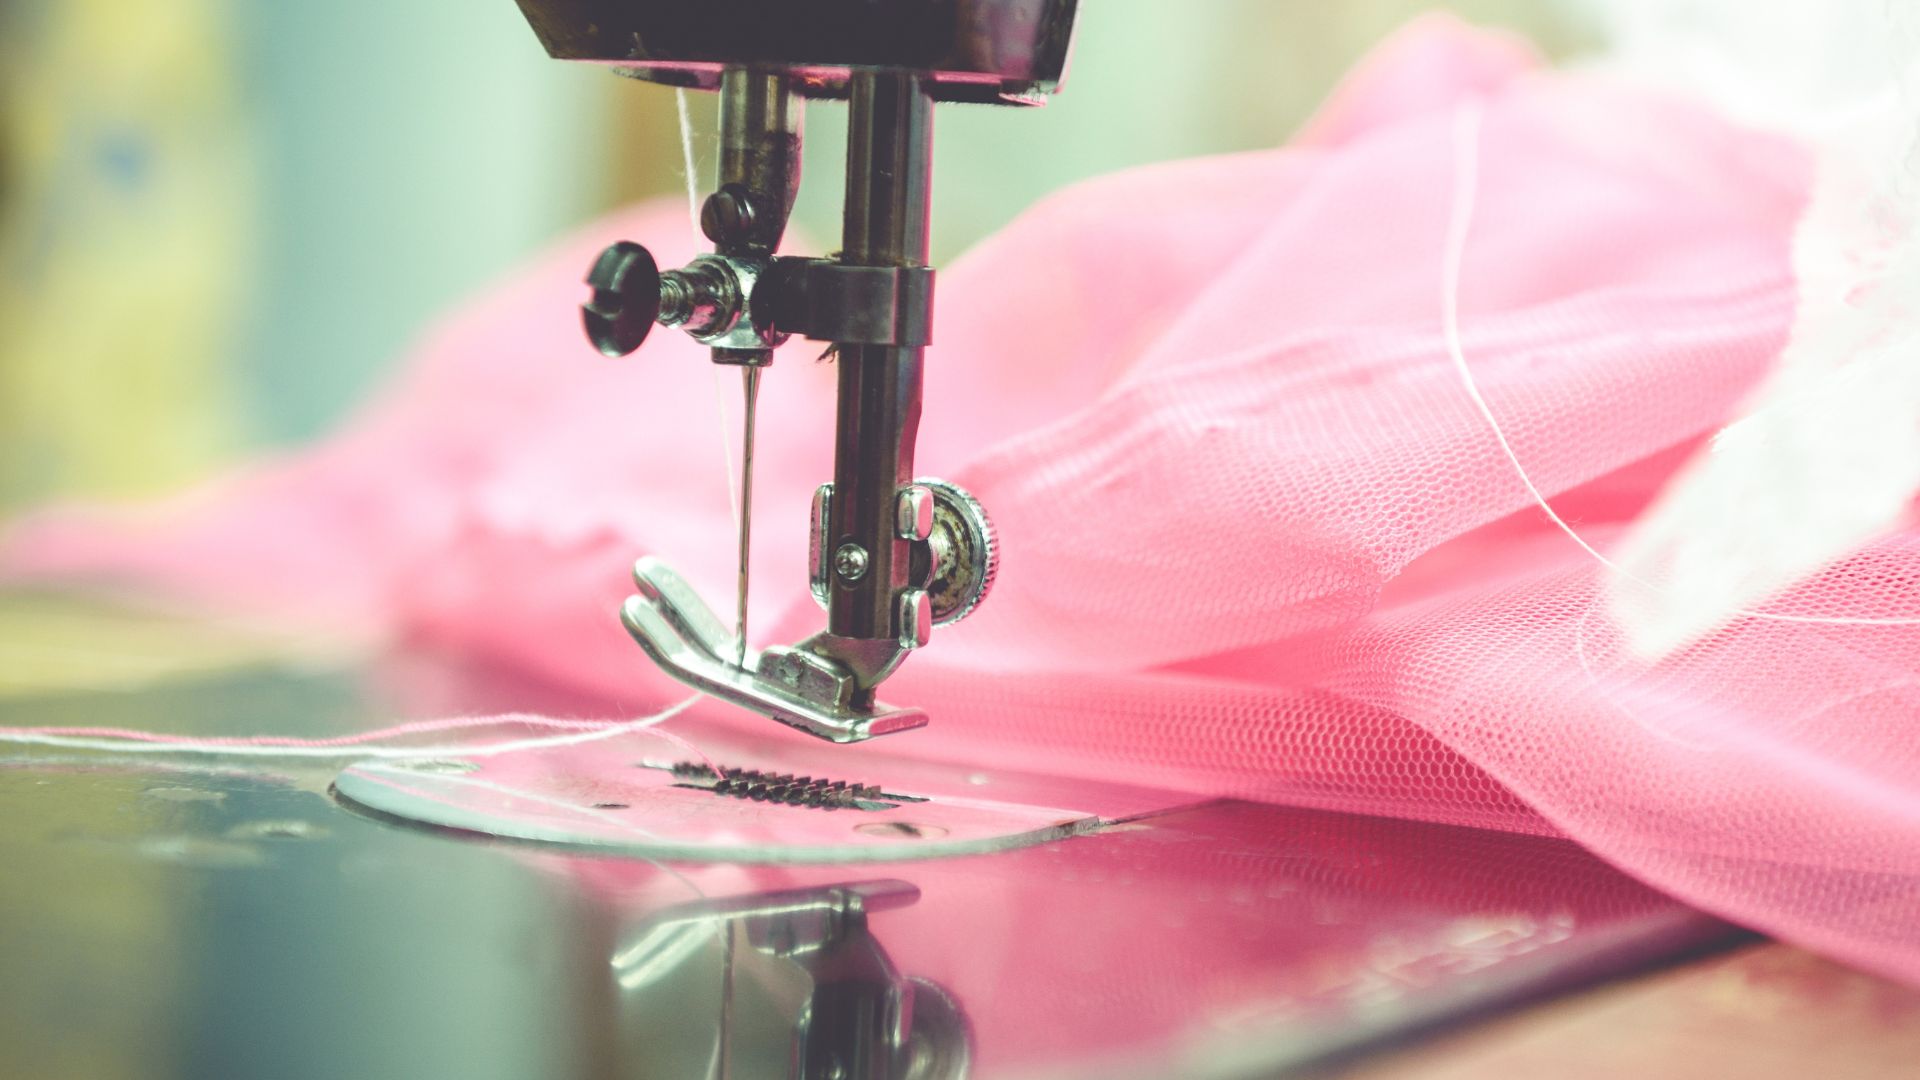 Sewing fragile tulle and sewing thick leather materials are entirely different experiences